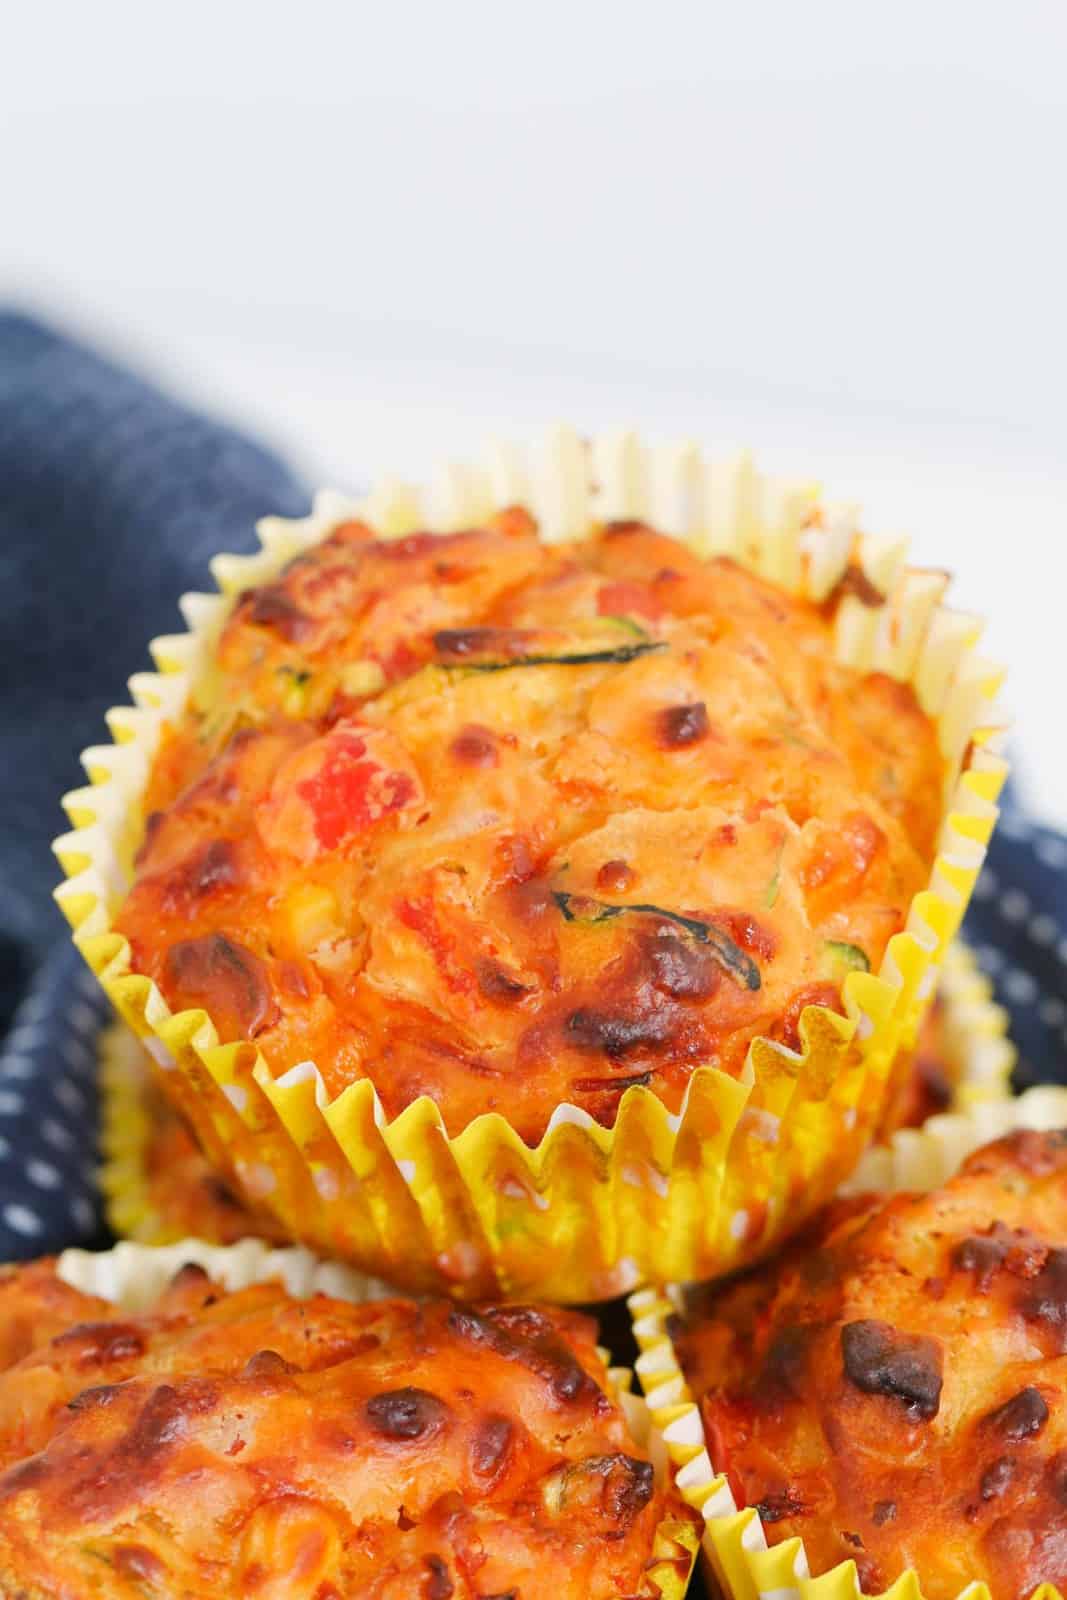 A close up of a vegetable savoury muffin in a yellow muffin case